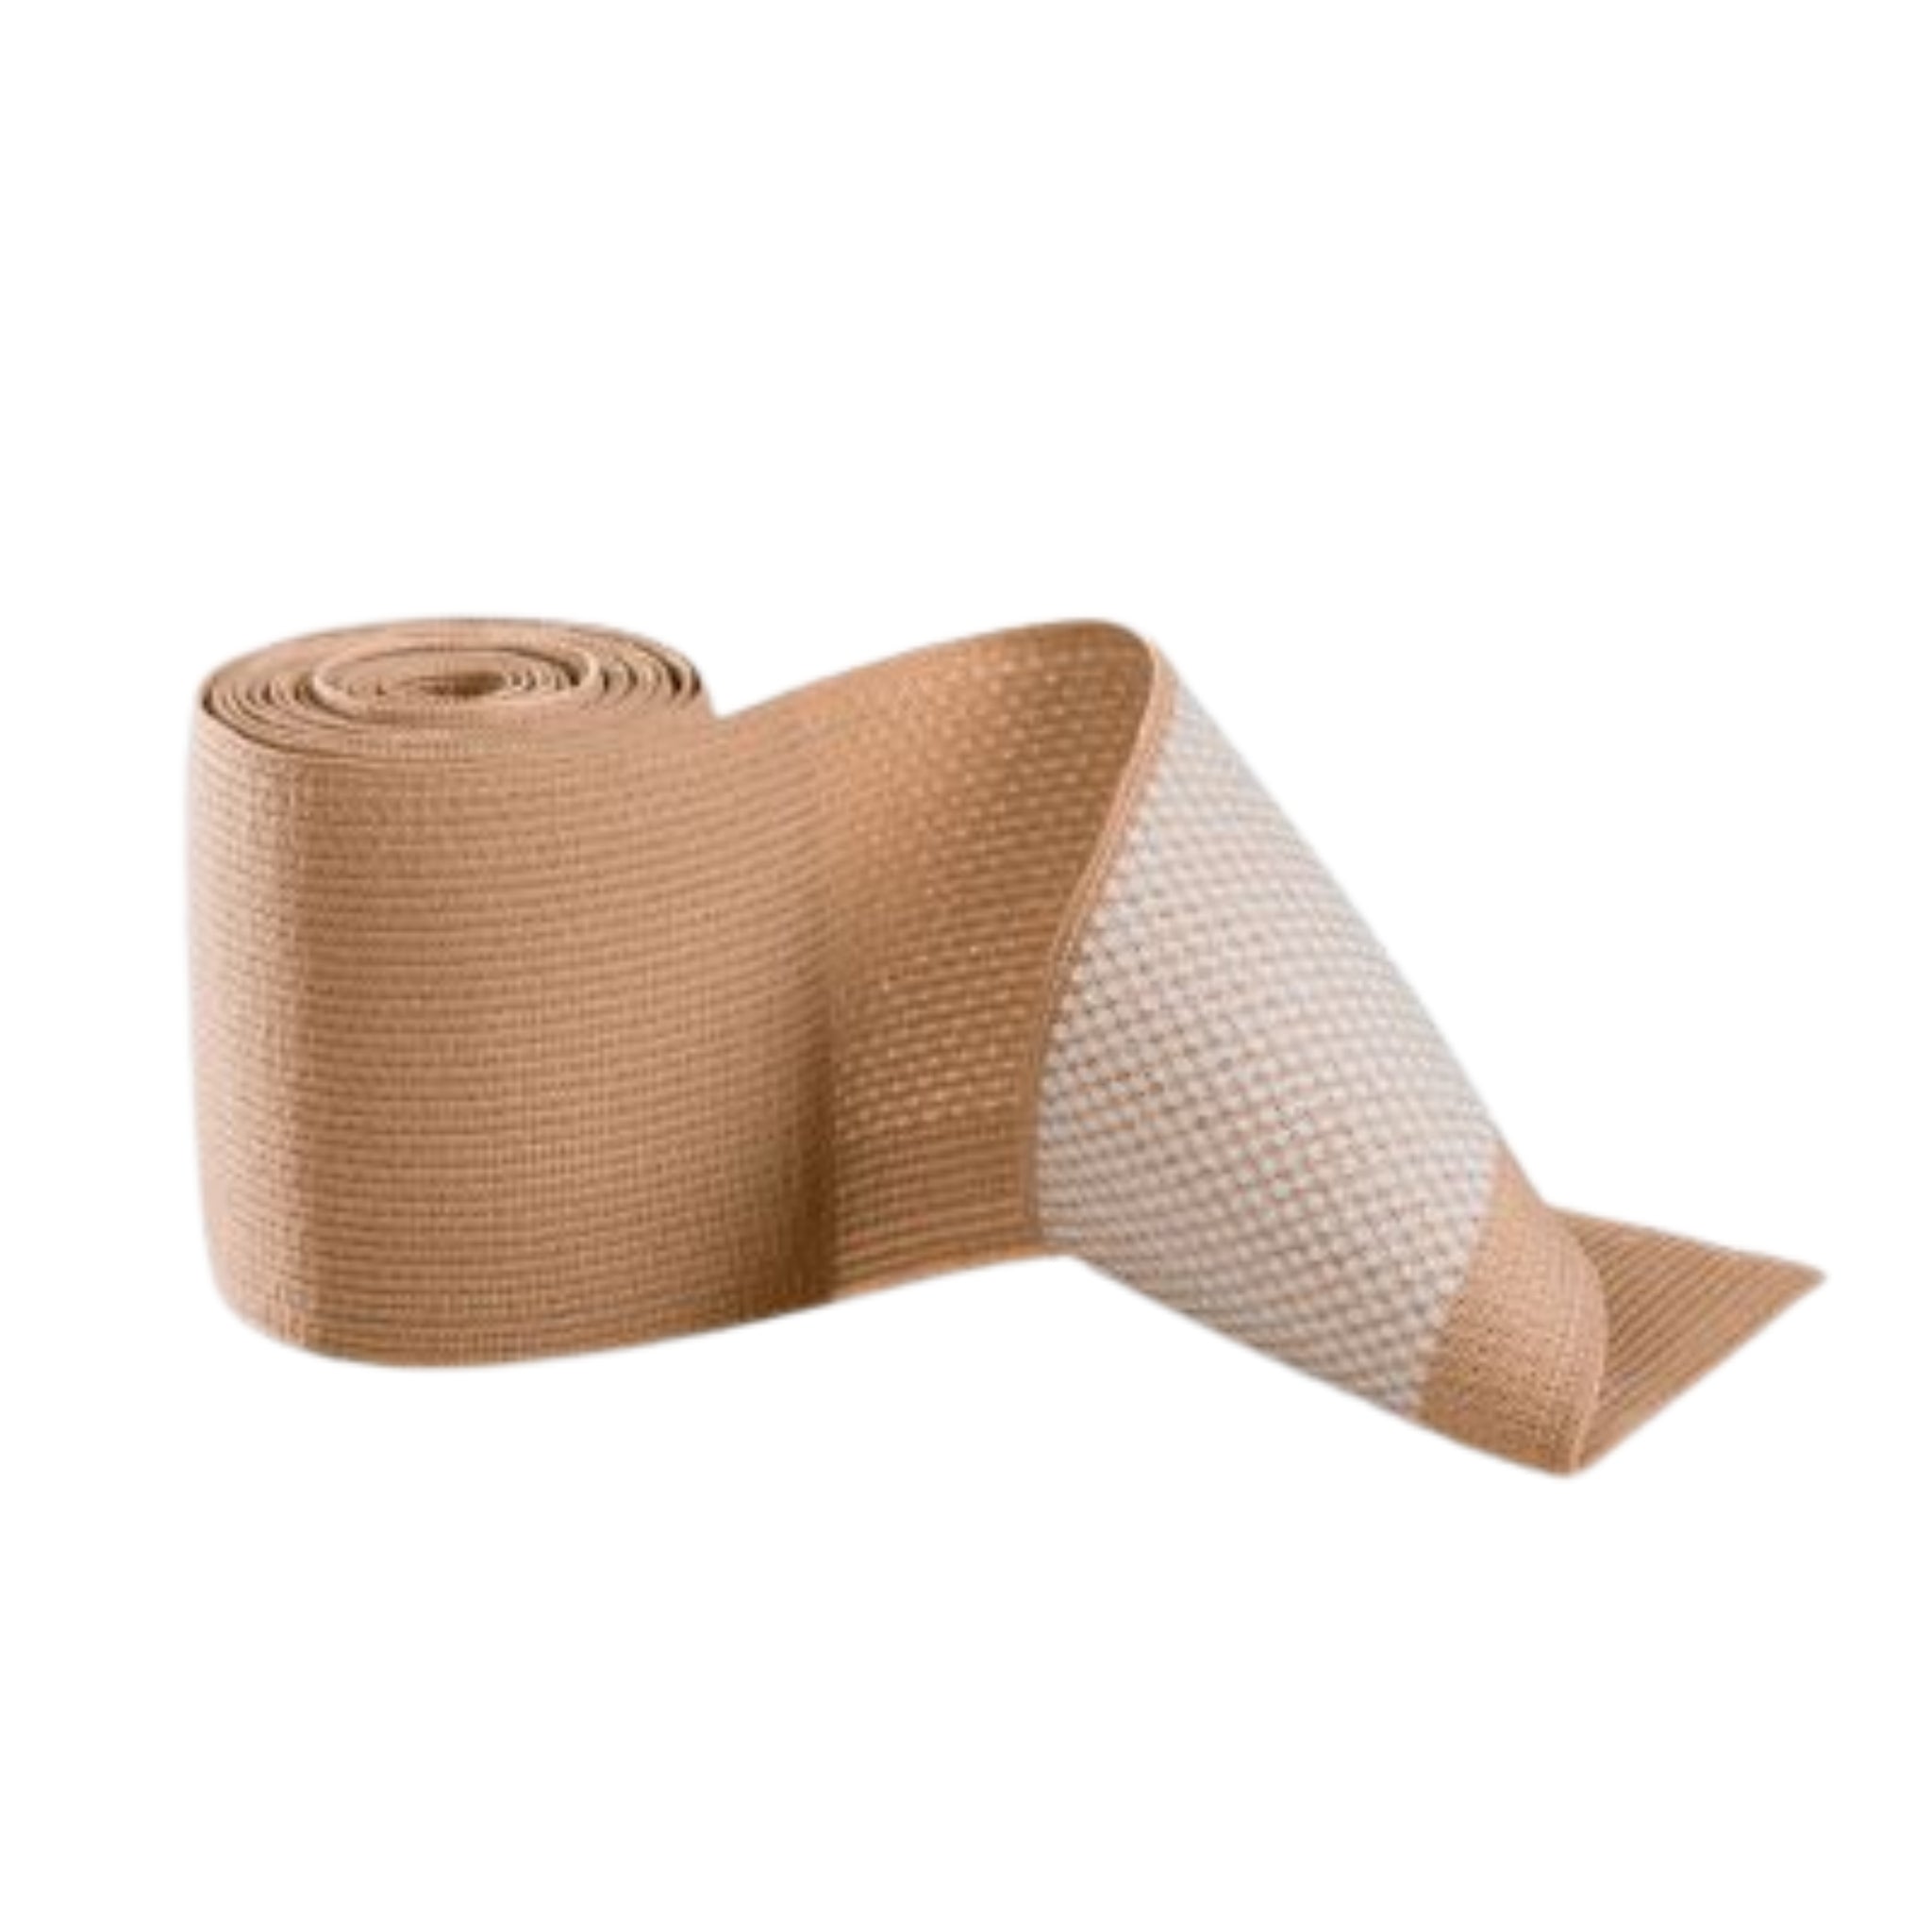 Compression Stockings | Thigh High | Sensitive Topband Wide | Closed Toe | Caramel | mediven cotton